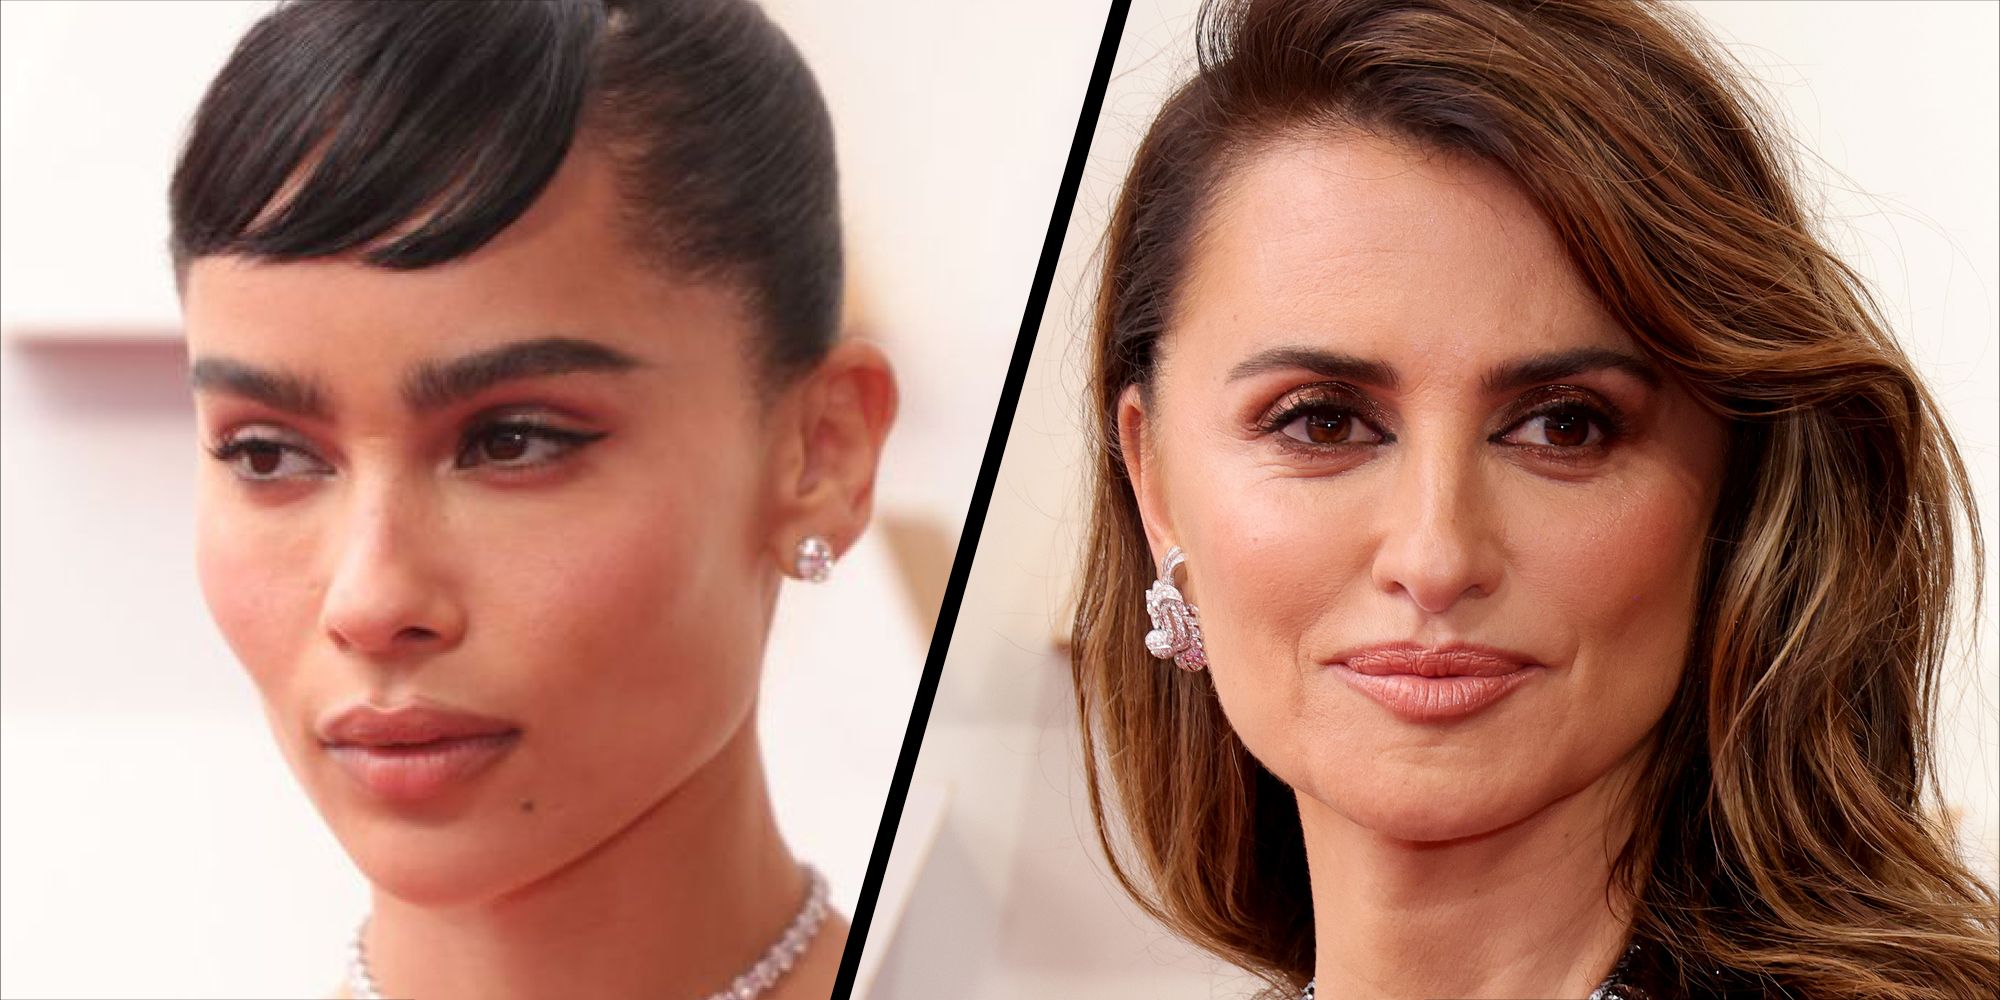 The Nineties nude lip was all over the Oscars red carpet